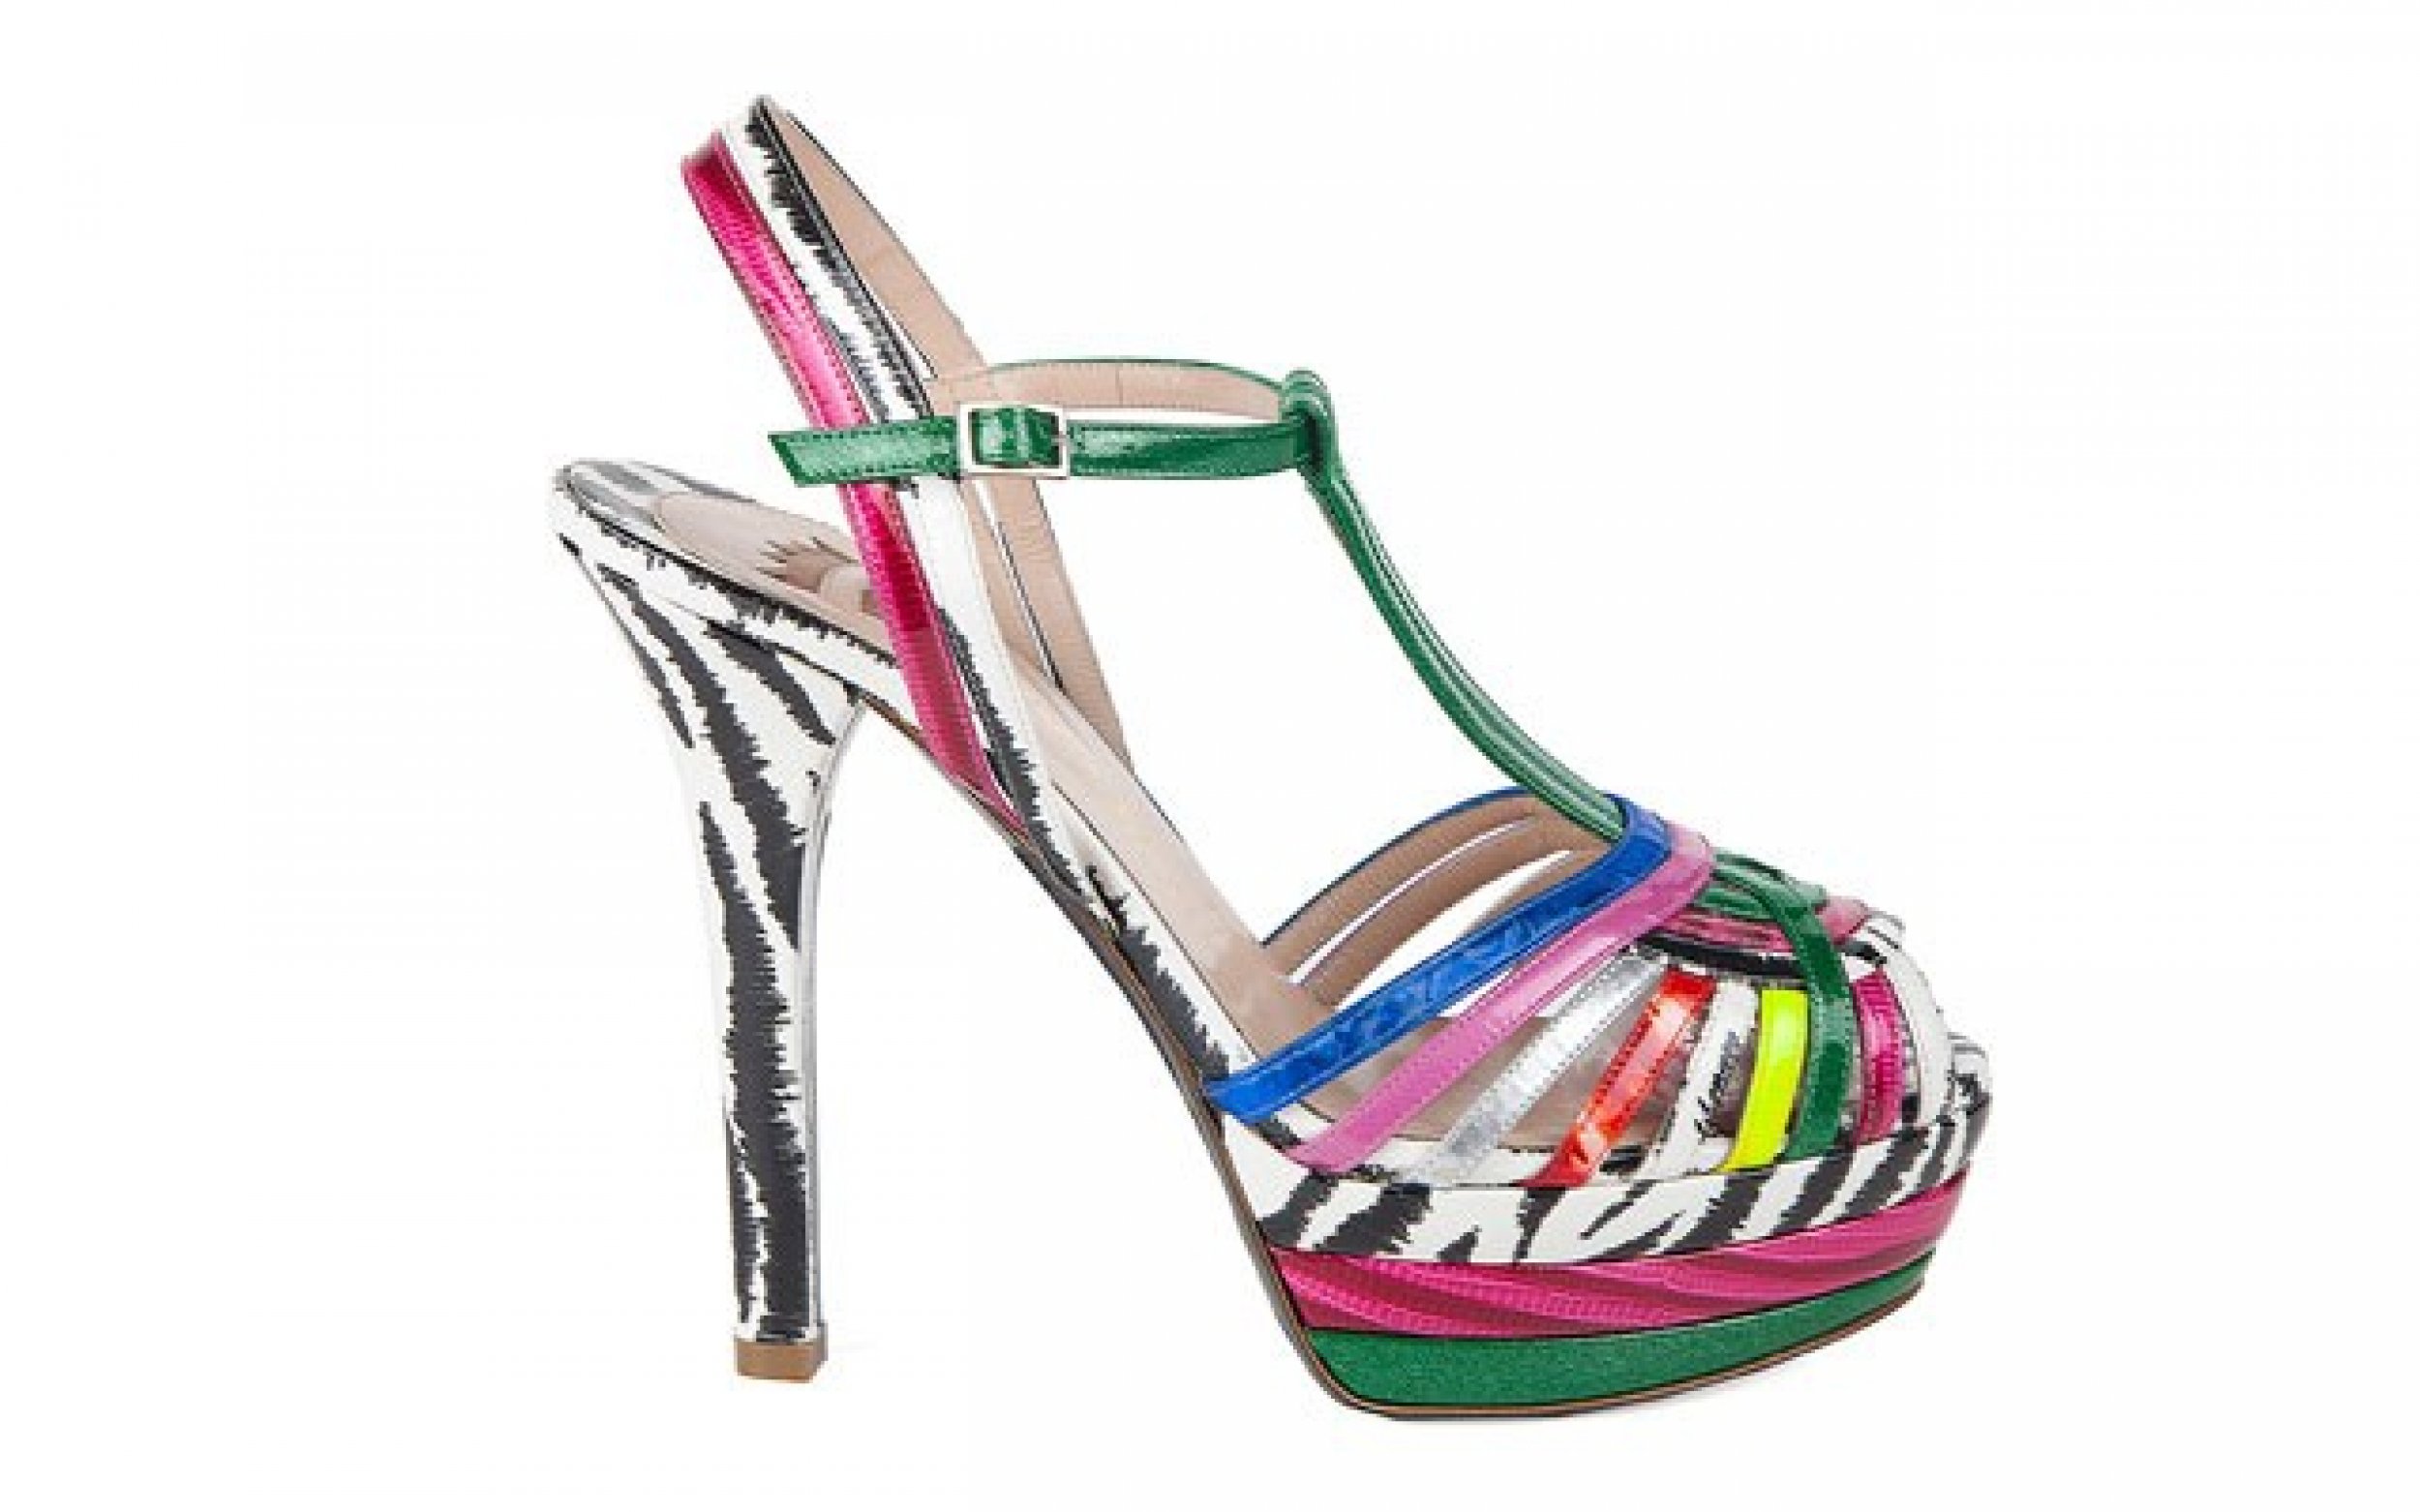 What shoes are fashionable in Spring 2011